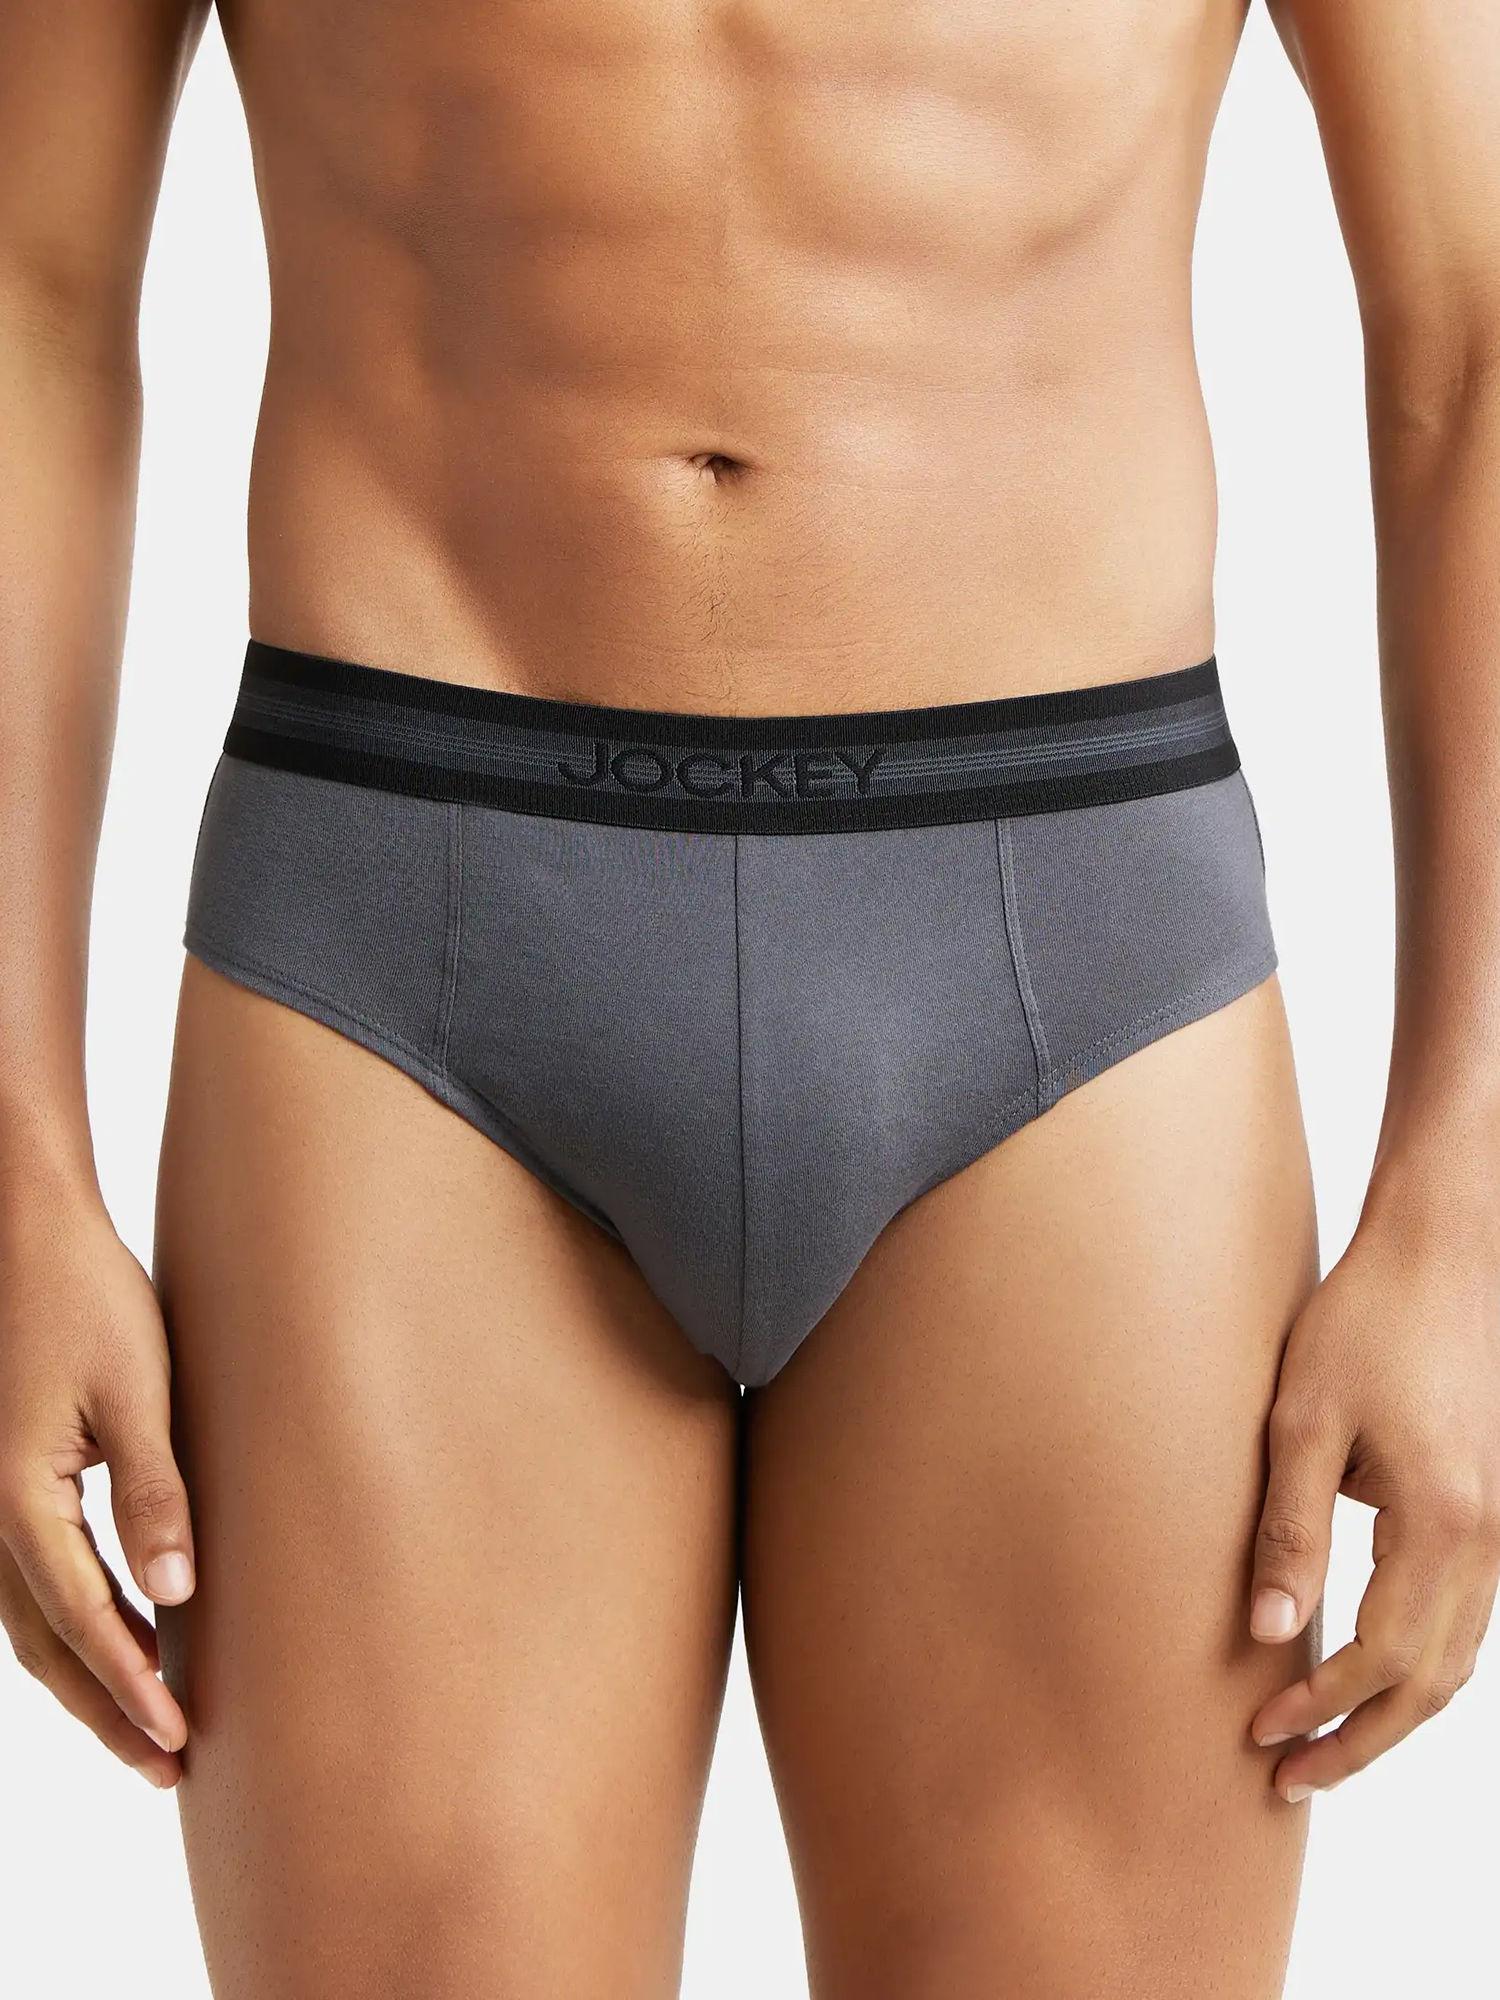 1010 Mens Super Cotton Solid Brief with Stay Fresh Properties-Black